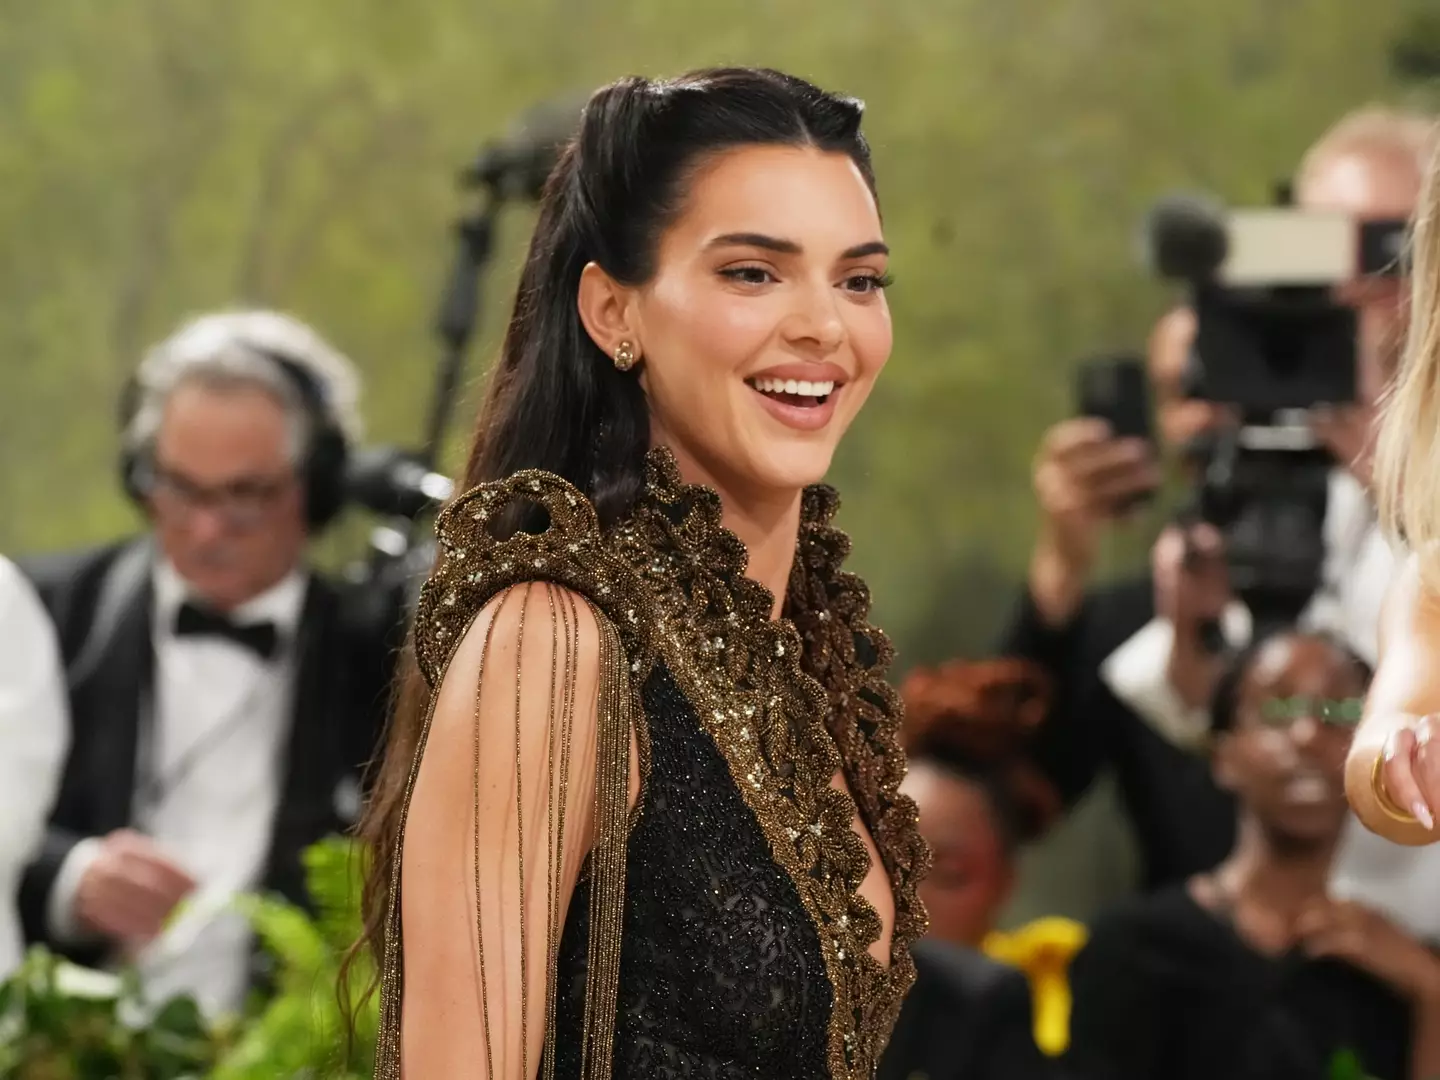 The dress Kendall Jenner wore had been carefully preserved for 25 years. (Jeff Kravitz/FilmMagic/Getty Images)